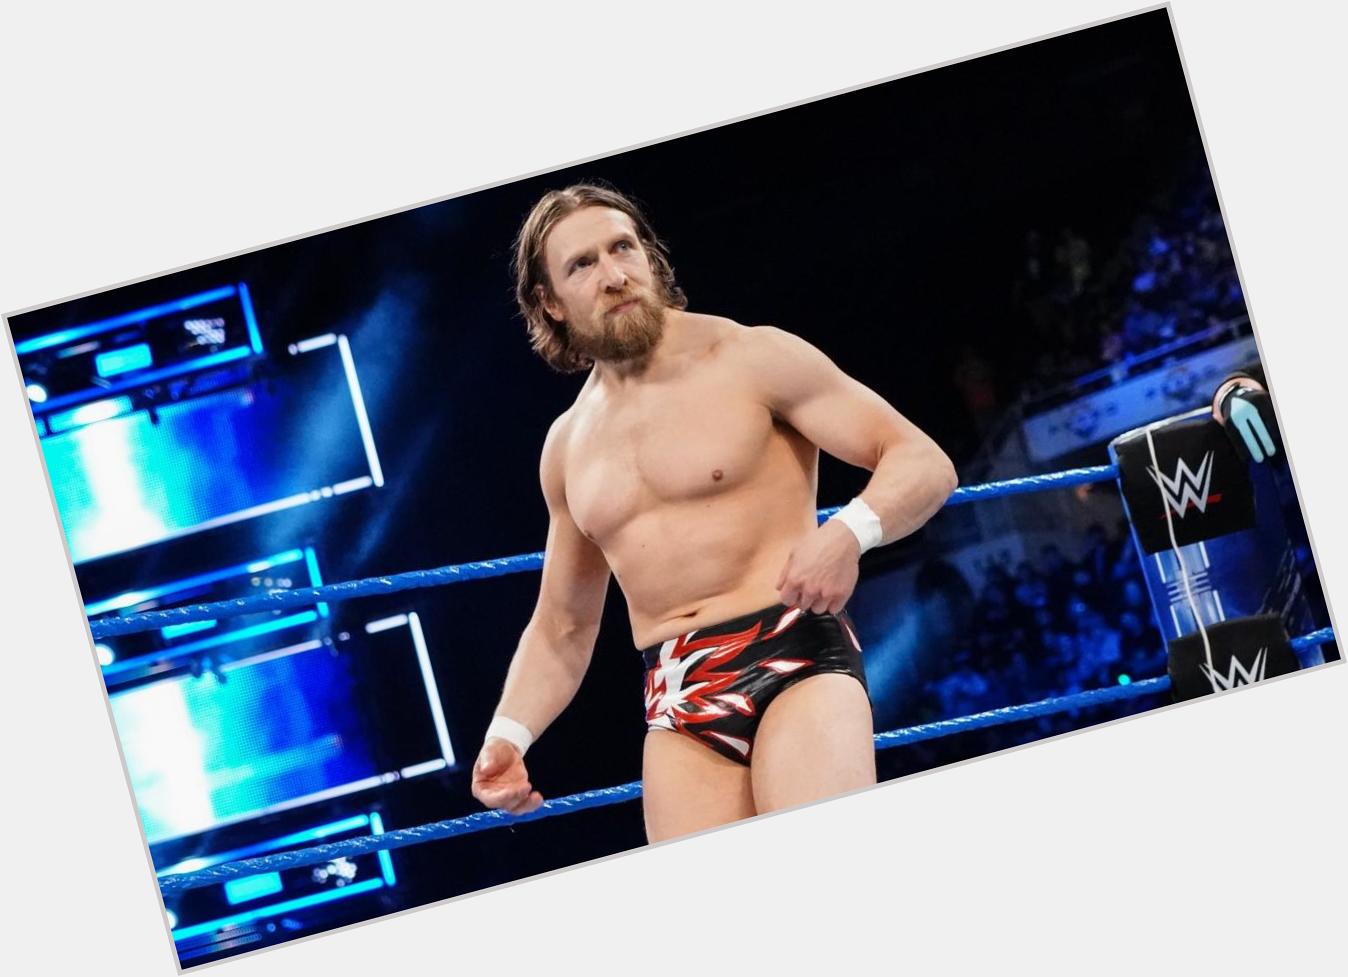 Happy Birthday to Daniel Bryan.

This guy is amazing. That is all. 